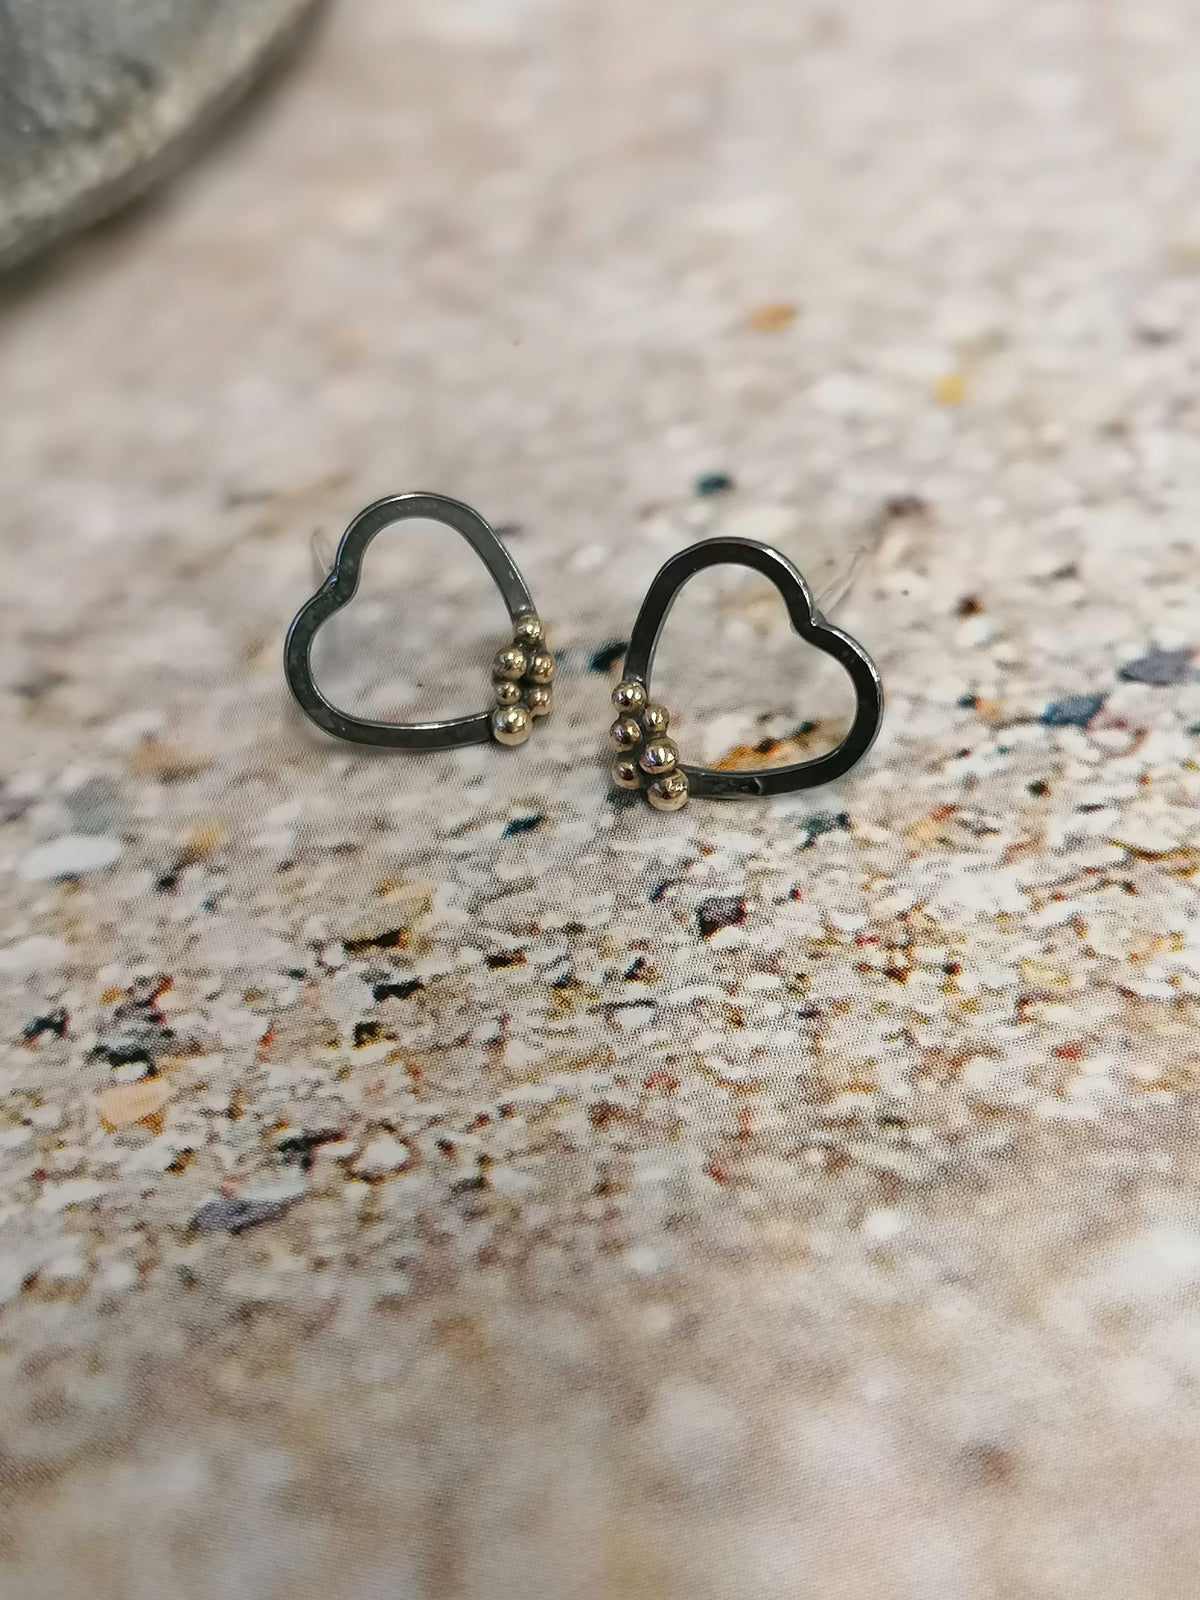 &#39;SA Ea48 oxidised heart studs with gold granules&#39; by Sandra Austin jewellery, available at Padstow Gallery, Cornwall